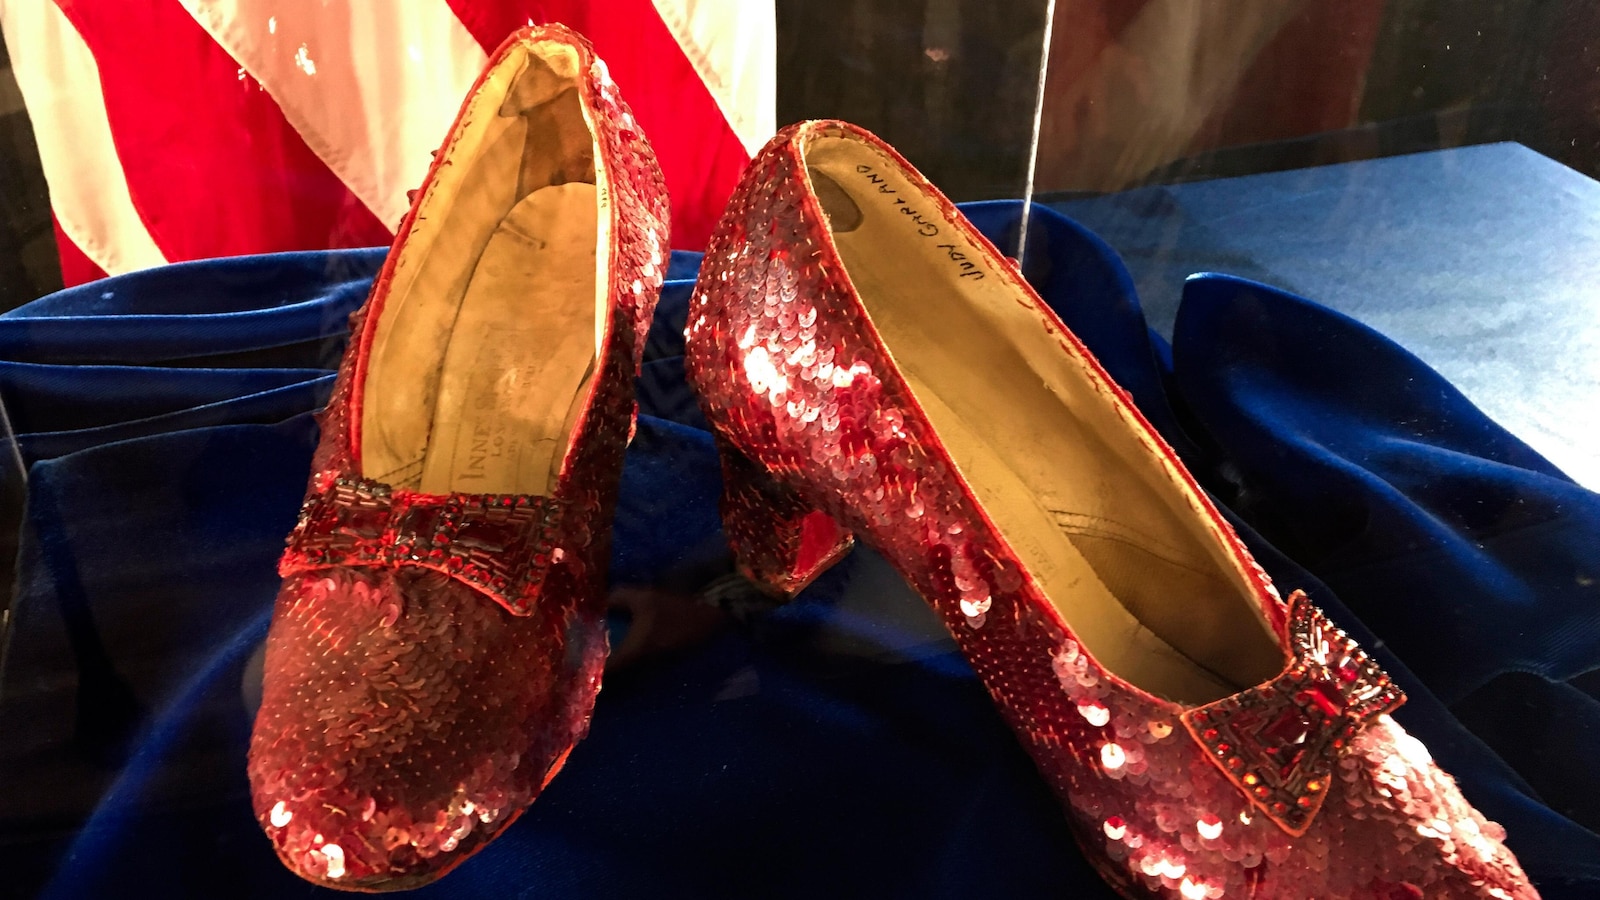 Second Man Charged in Connection with 2005 Theft of Ruby Slippers from 'The Wizard of Oz'